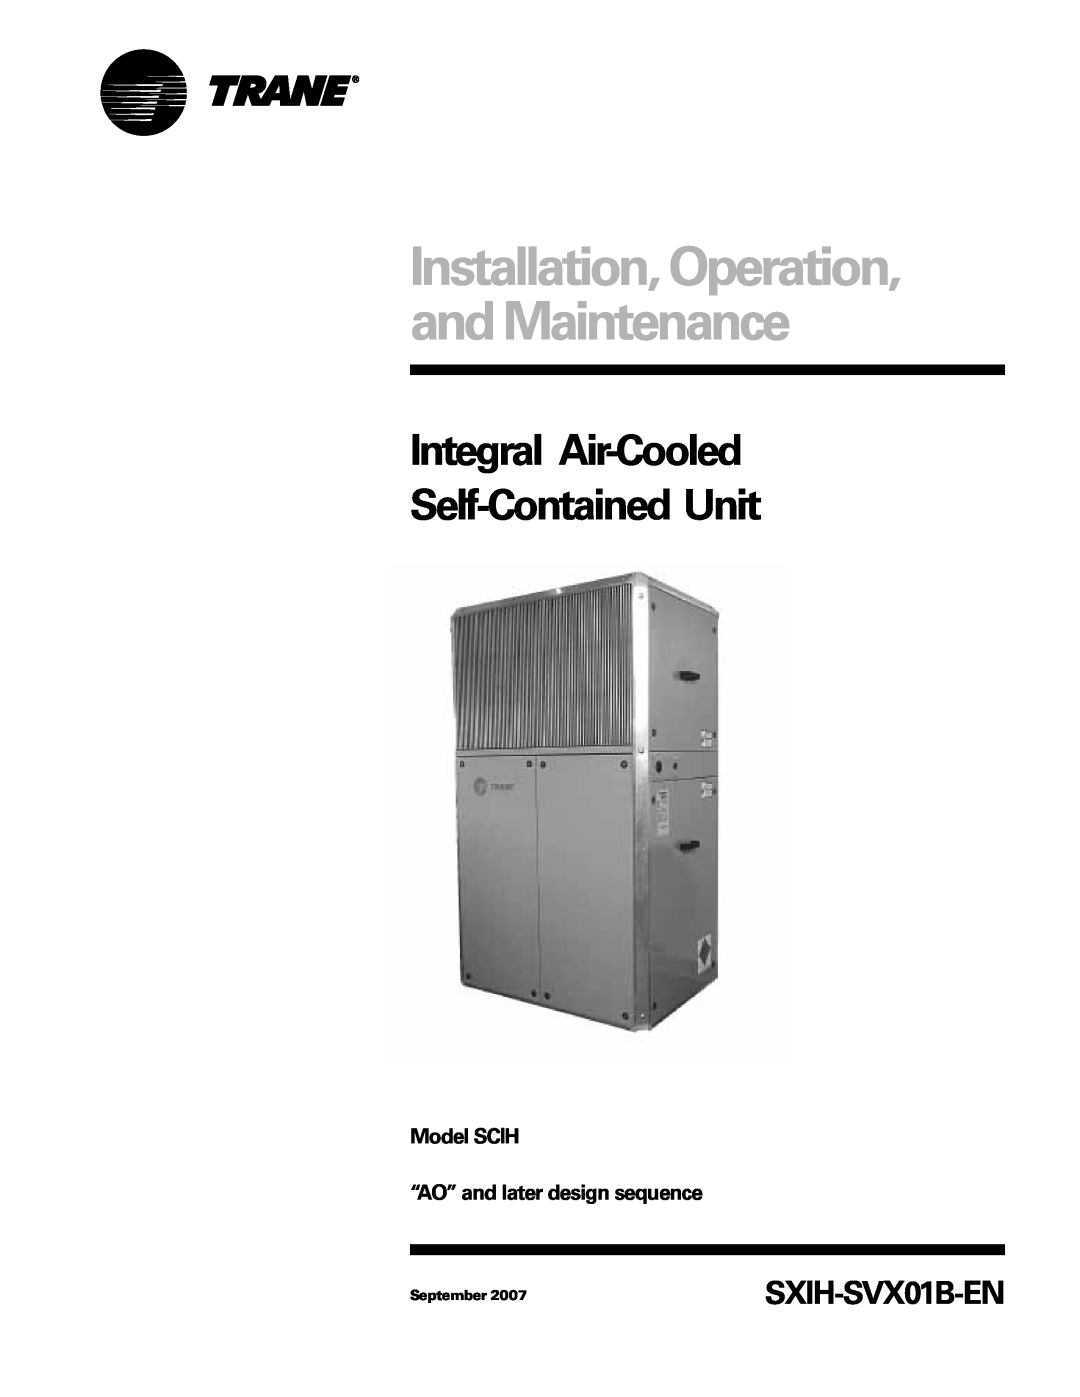 Trane manual Model SCIH “AO” and later design sequence, Installation, Operation, and Maintenance, SXIH-SVX01B-EN 